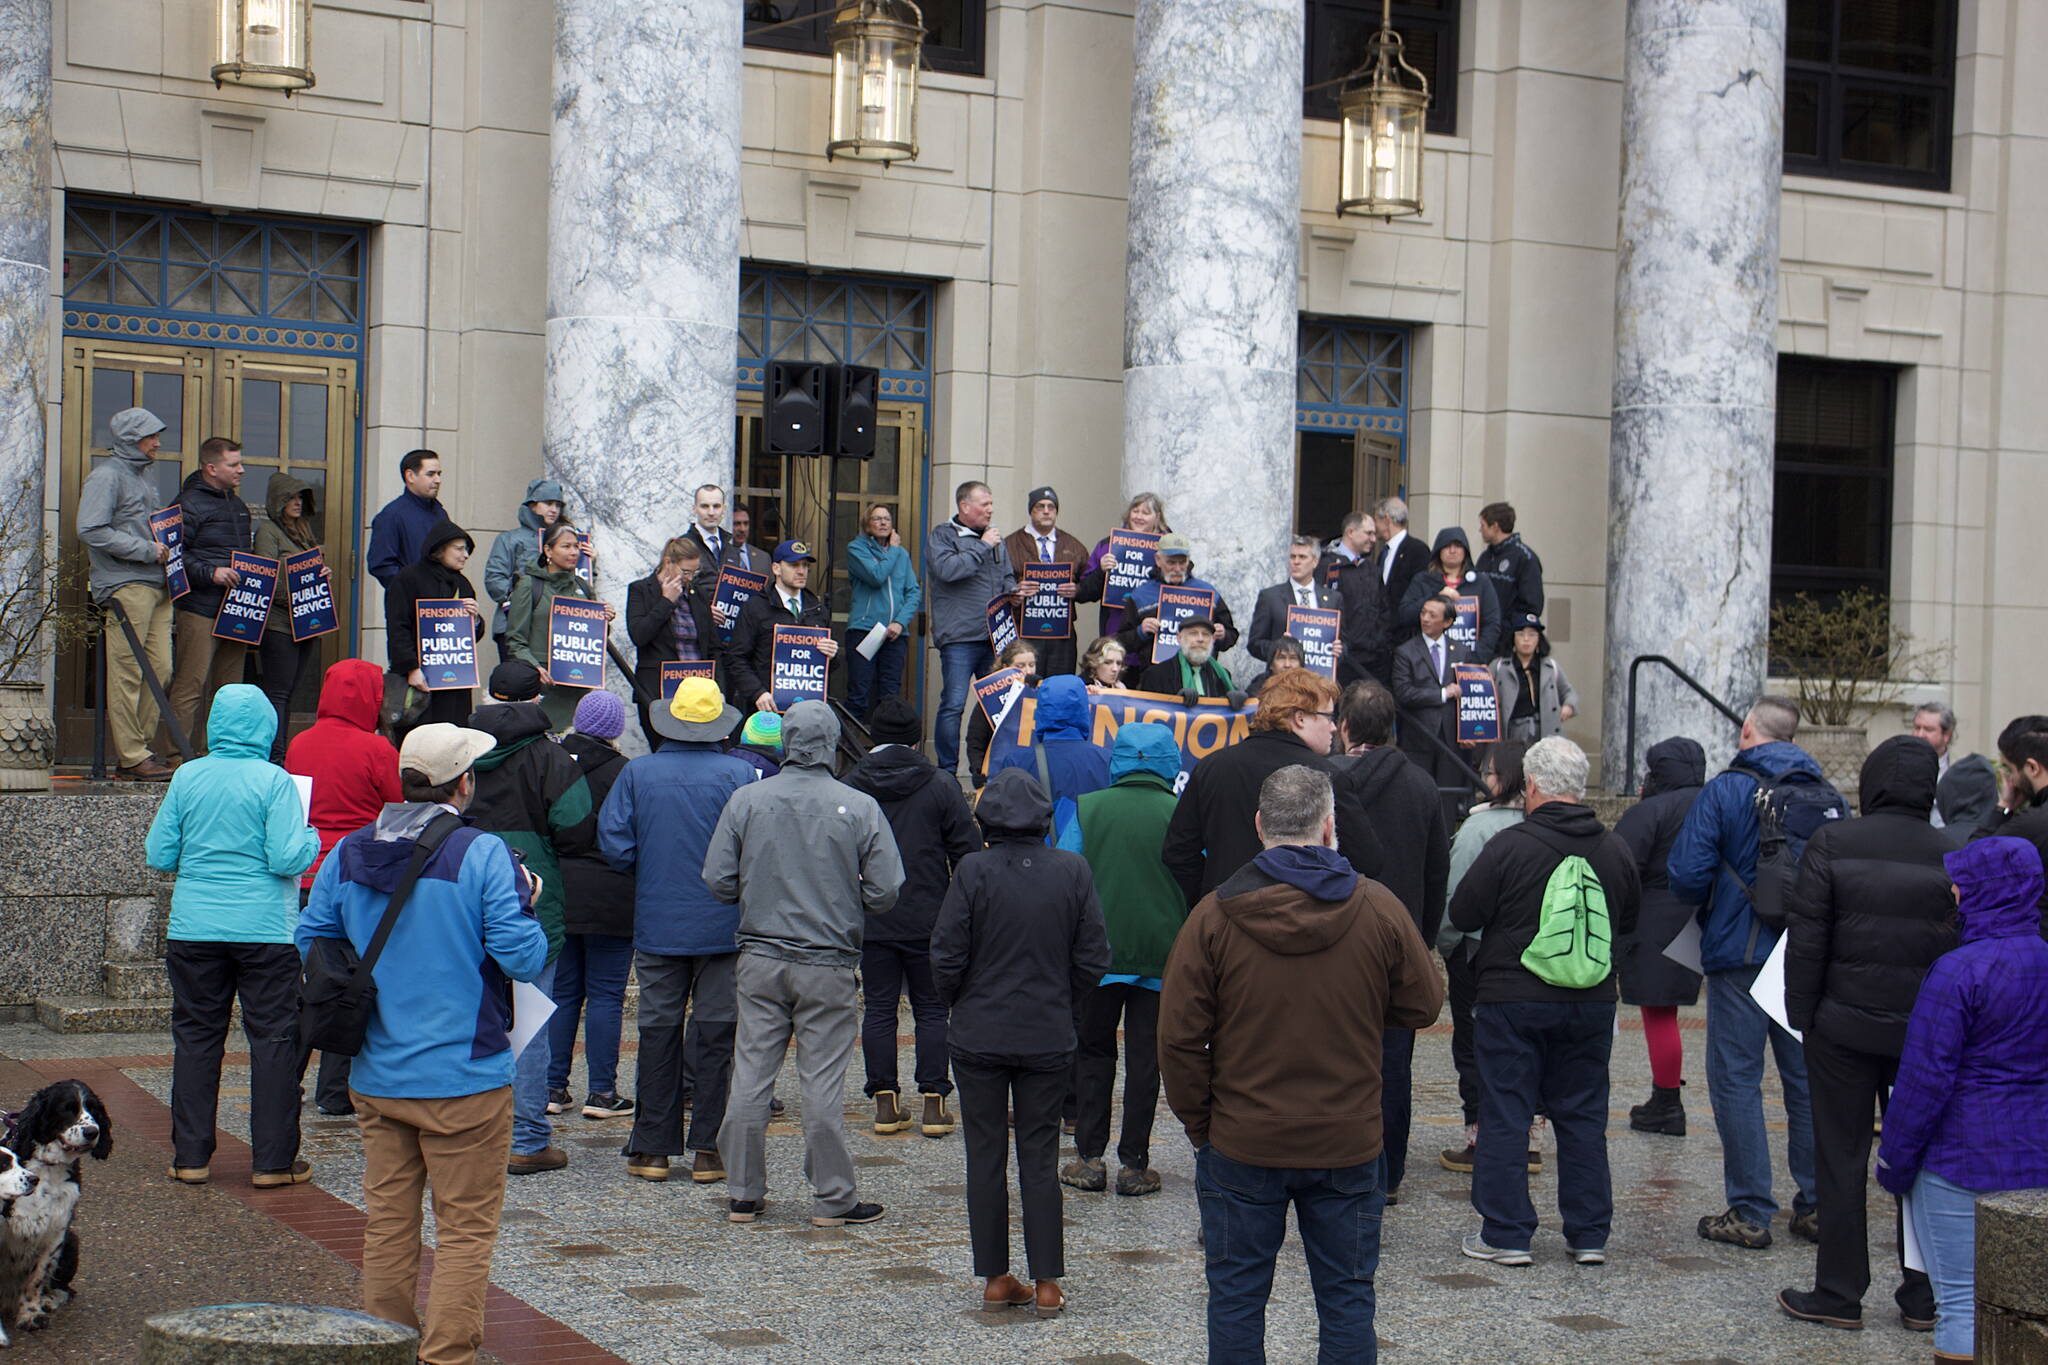 About 70 people, including 20 state lawmakers, gather in front of the Alaska State Capitol for a rally supporting a boost to public employee pensions on Tuesday evening. (Mark Sabbatini / Juneau Empire)